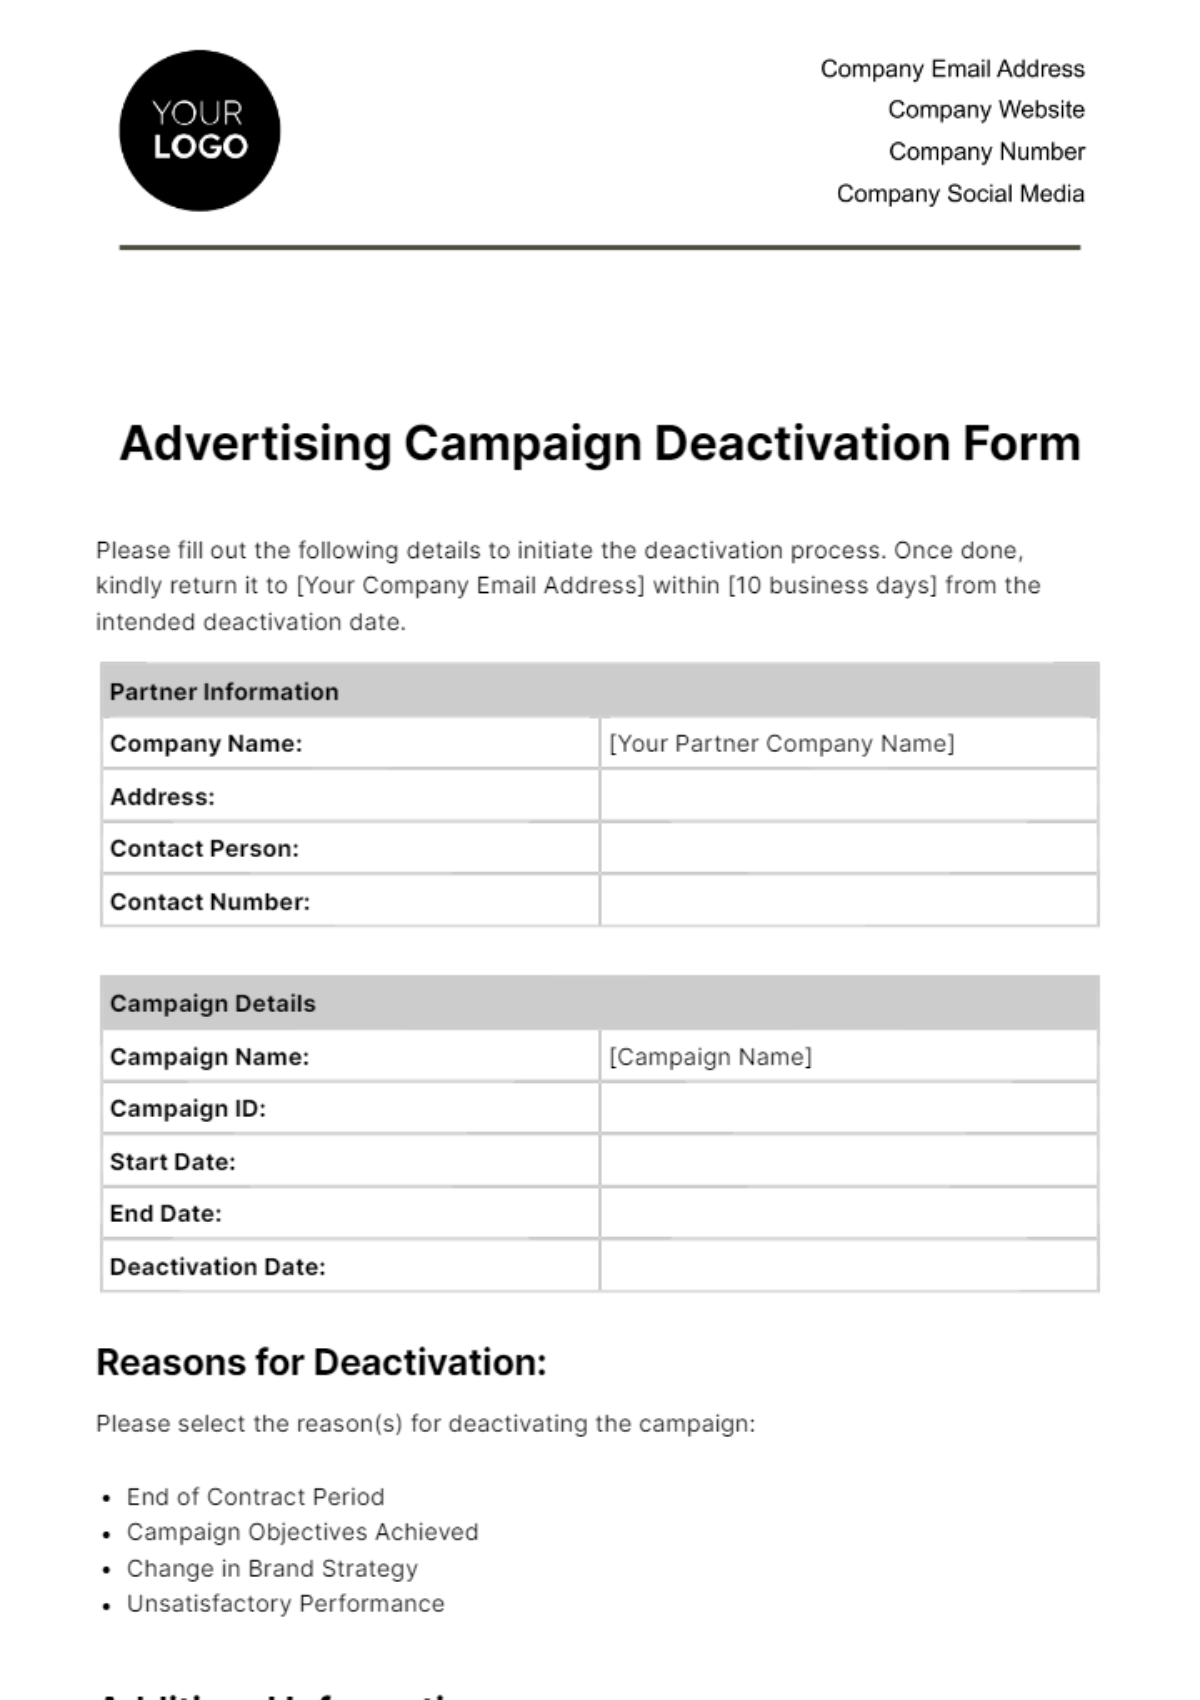 Free Advertising Campaign Deactivation Form Template